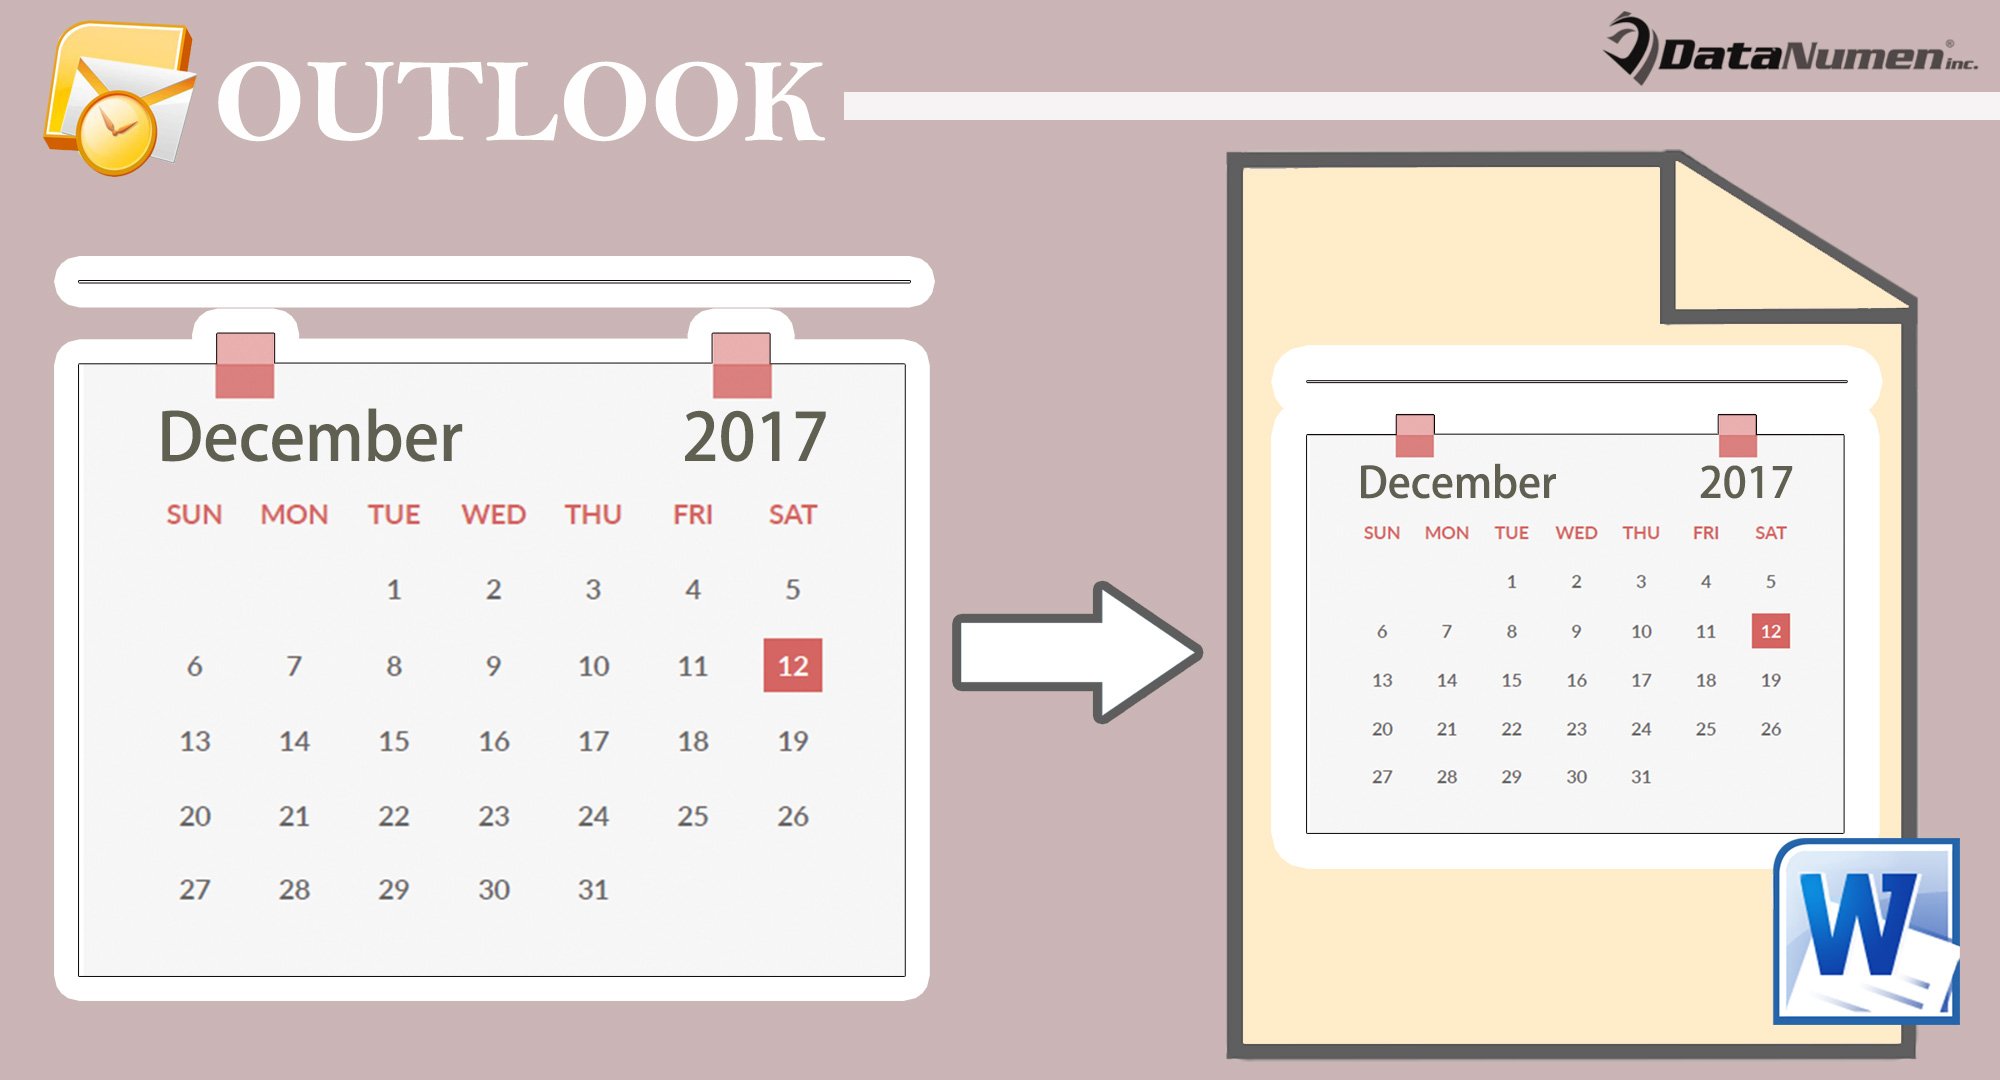 Export Your Outlook Calendar to a Word Document